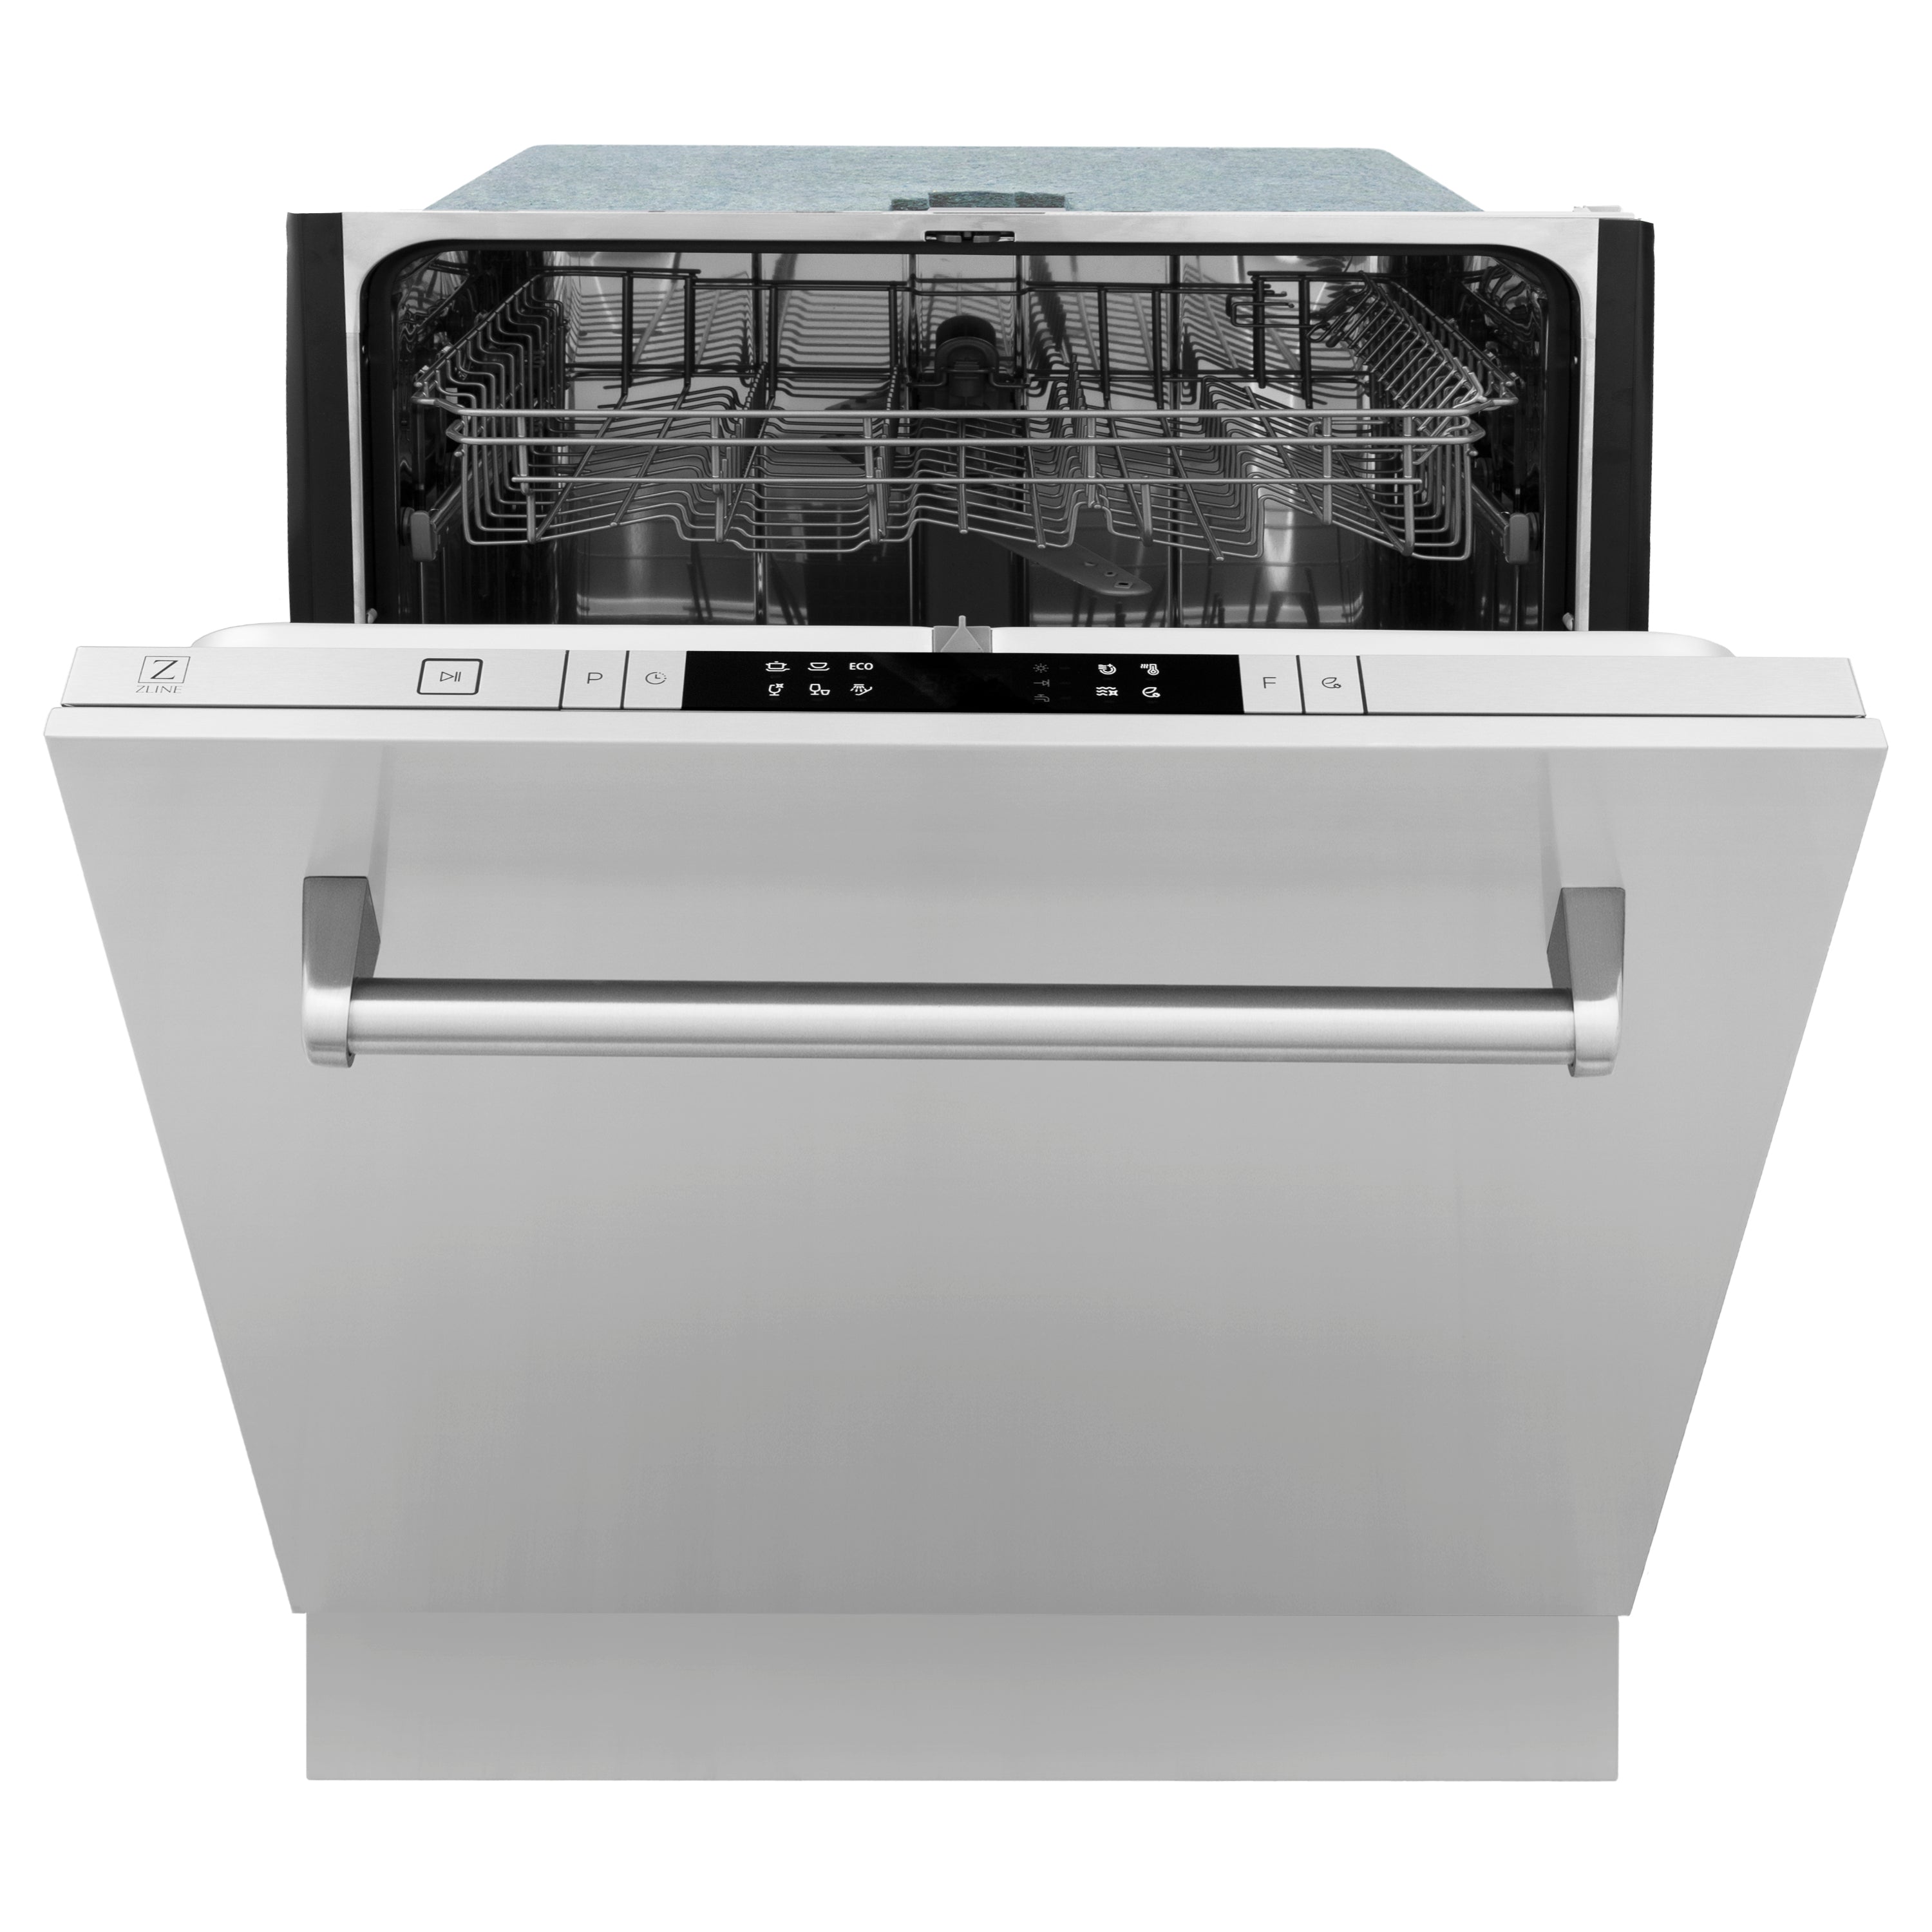 ZLINE 24 in. Stainless Steel Top Control Dishwasher with Stainless Steel Tub and Traditional Style Handle, 52dBa (DW-304-H-24)